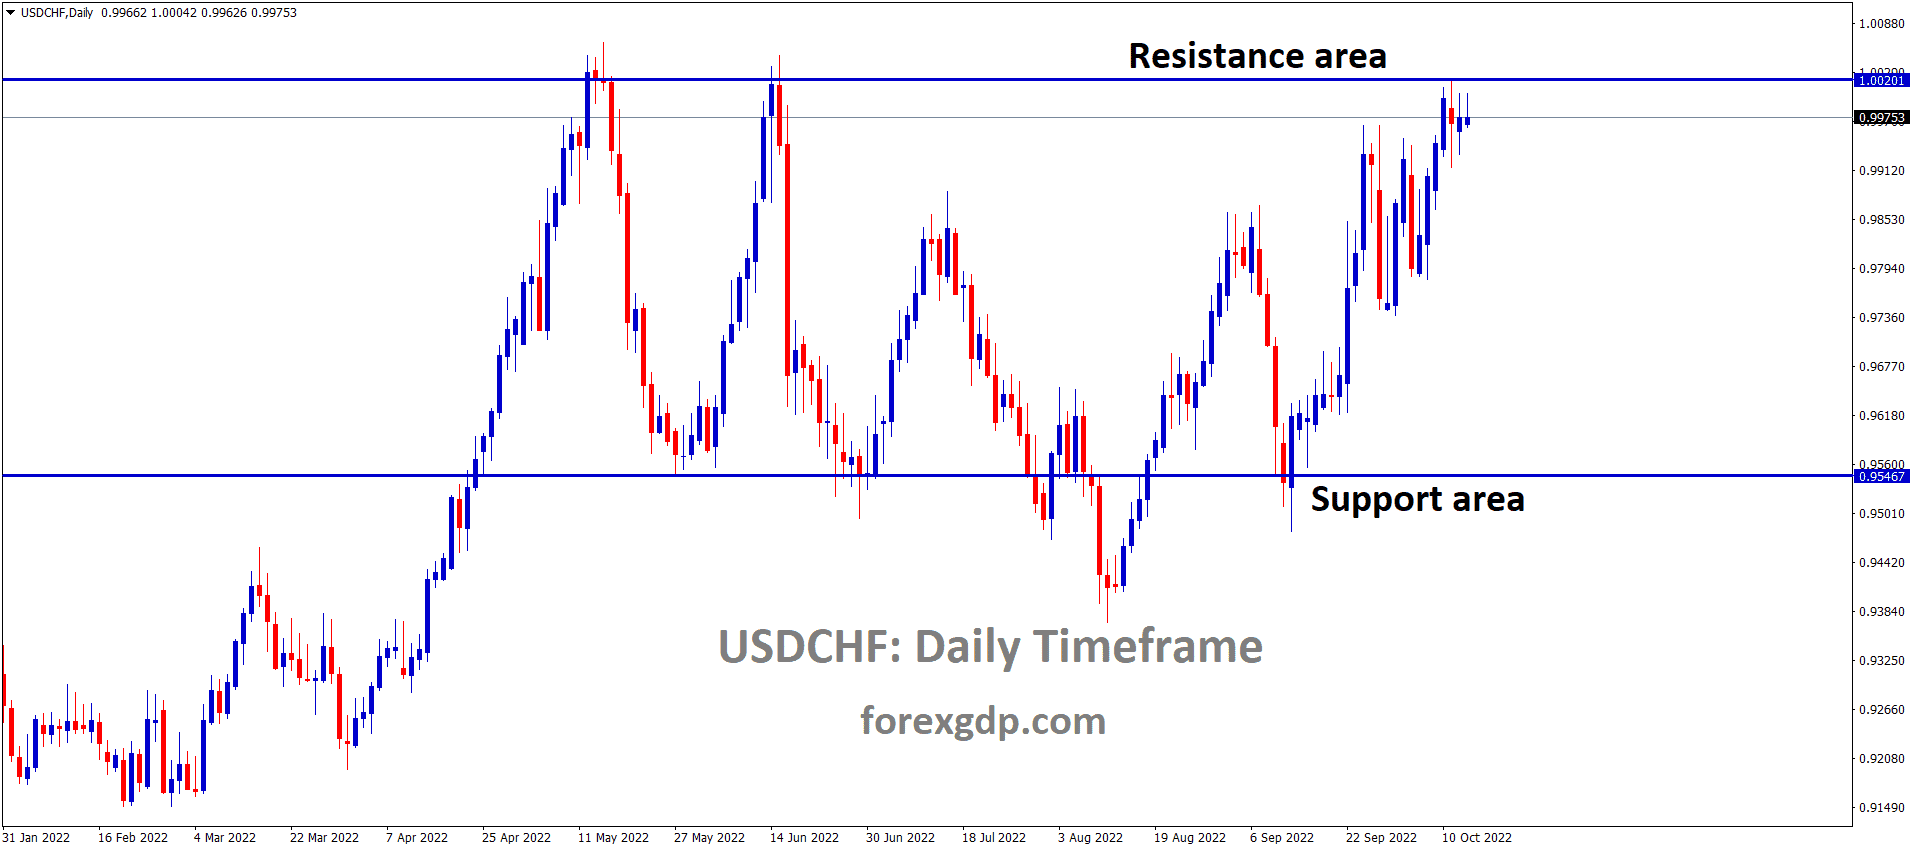 USDCHF is moving in the Box Pattern and the market has reached the resistance area of the pattern.